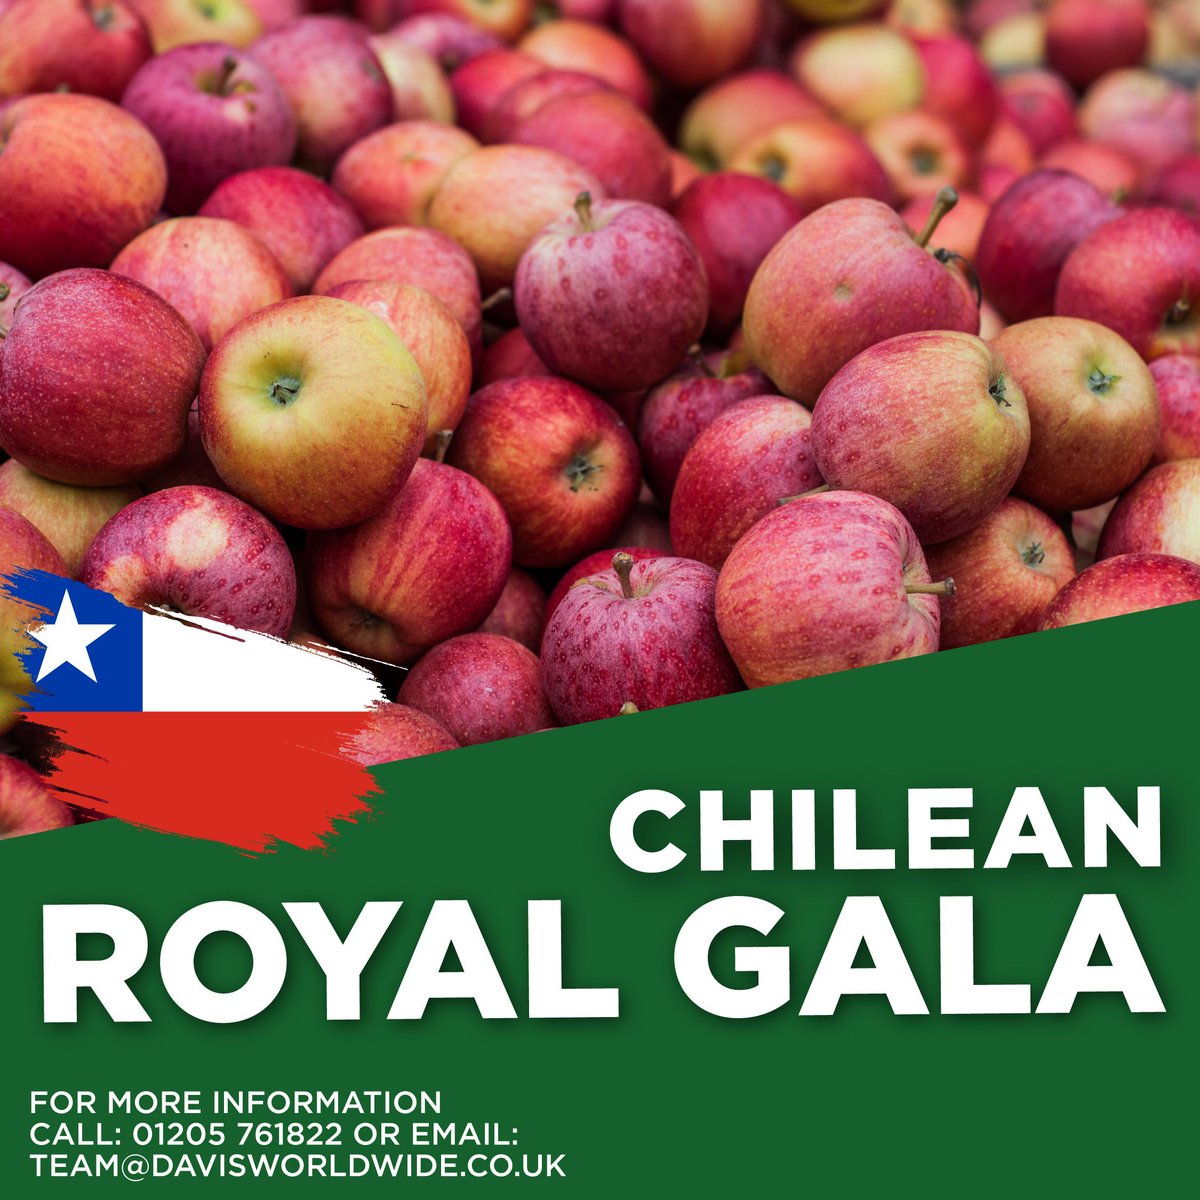 Available Now! Delicious Royal Gala Apples with real natural flavour... Chilean origin.

Order yours today...call 01205 761822 or email team@davisworldwide.co.uk

#apple #apples #fruit #freshapples #qualityapples #fruitlovers #fruits #LoveNature #appleswholsale #wholesaler #food